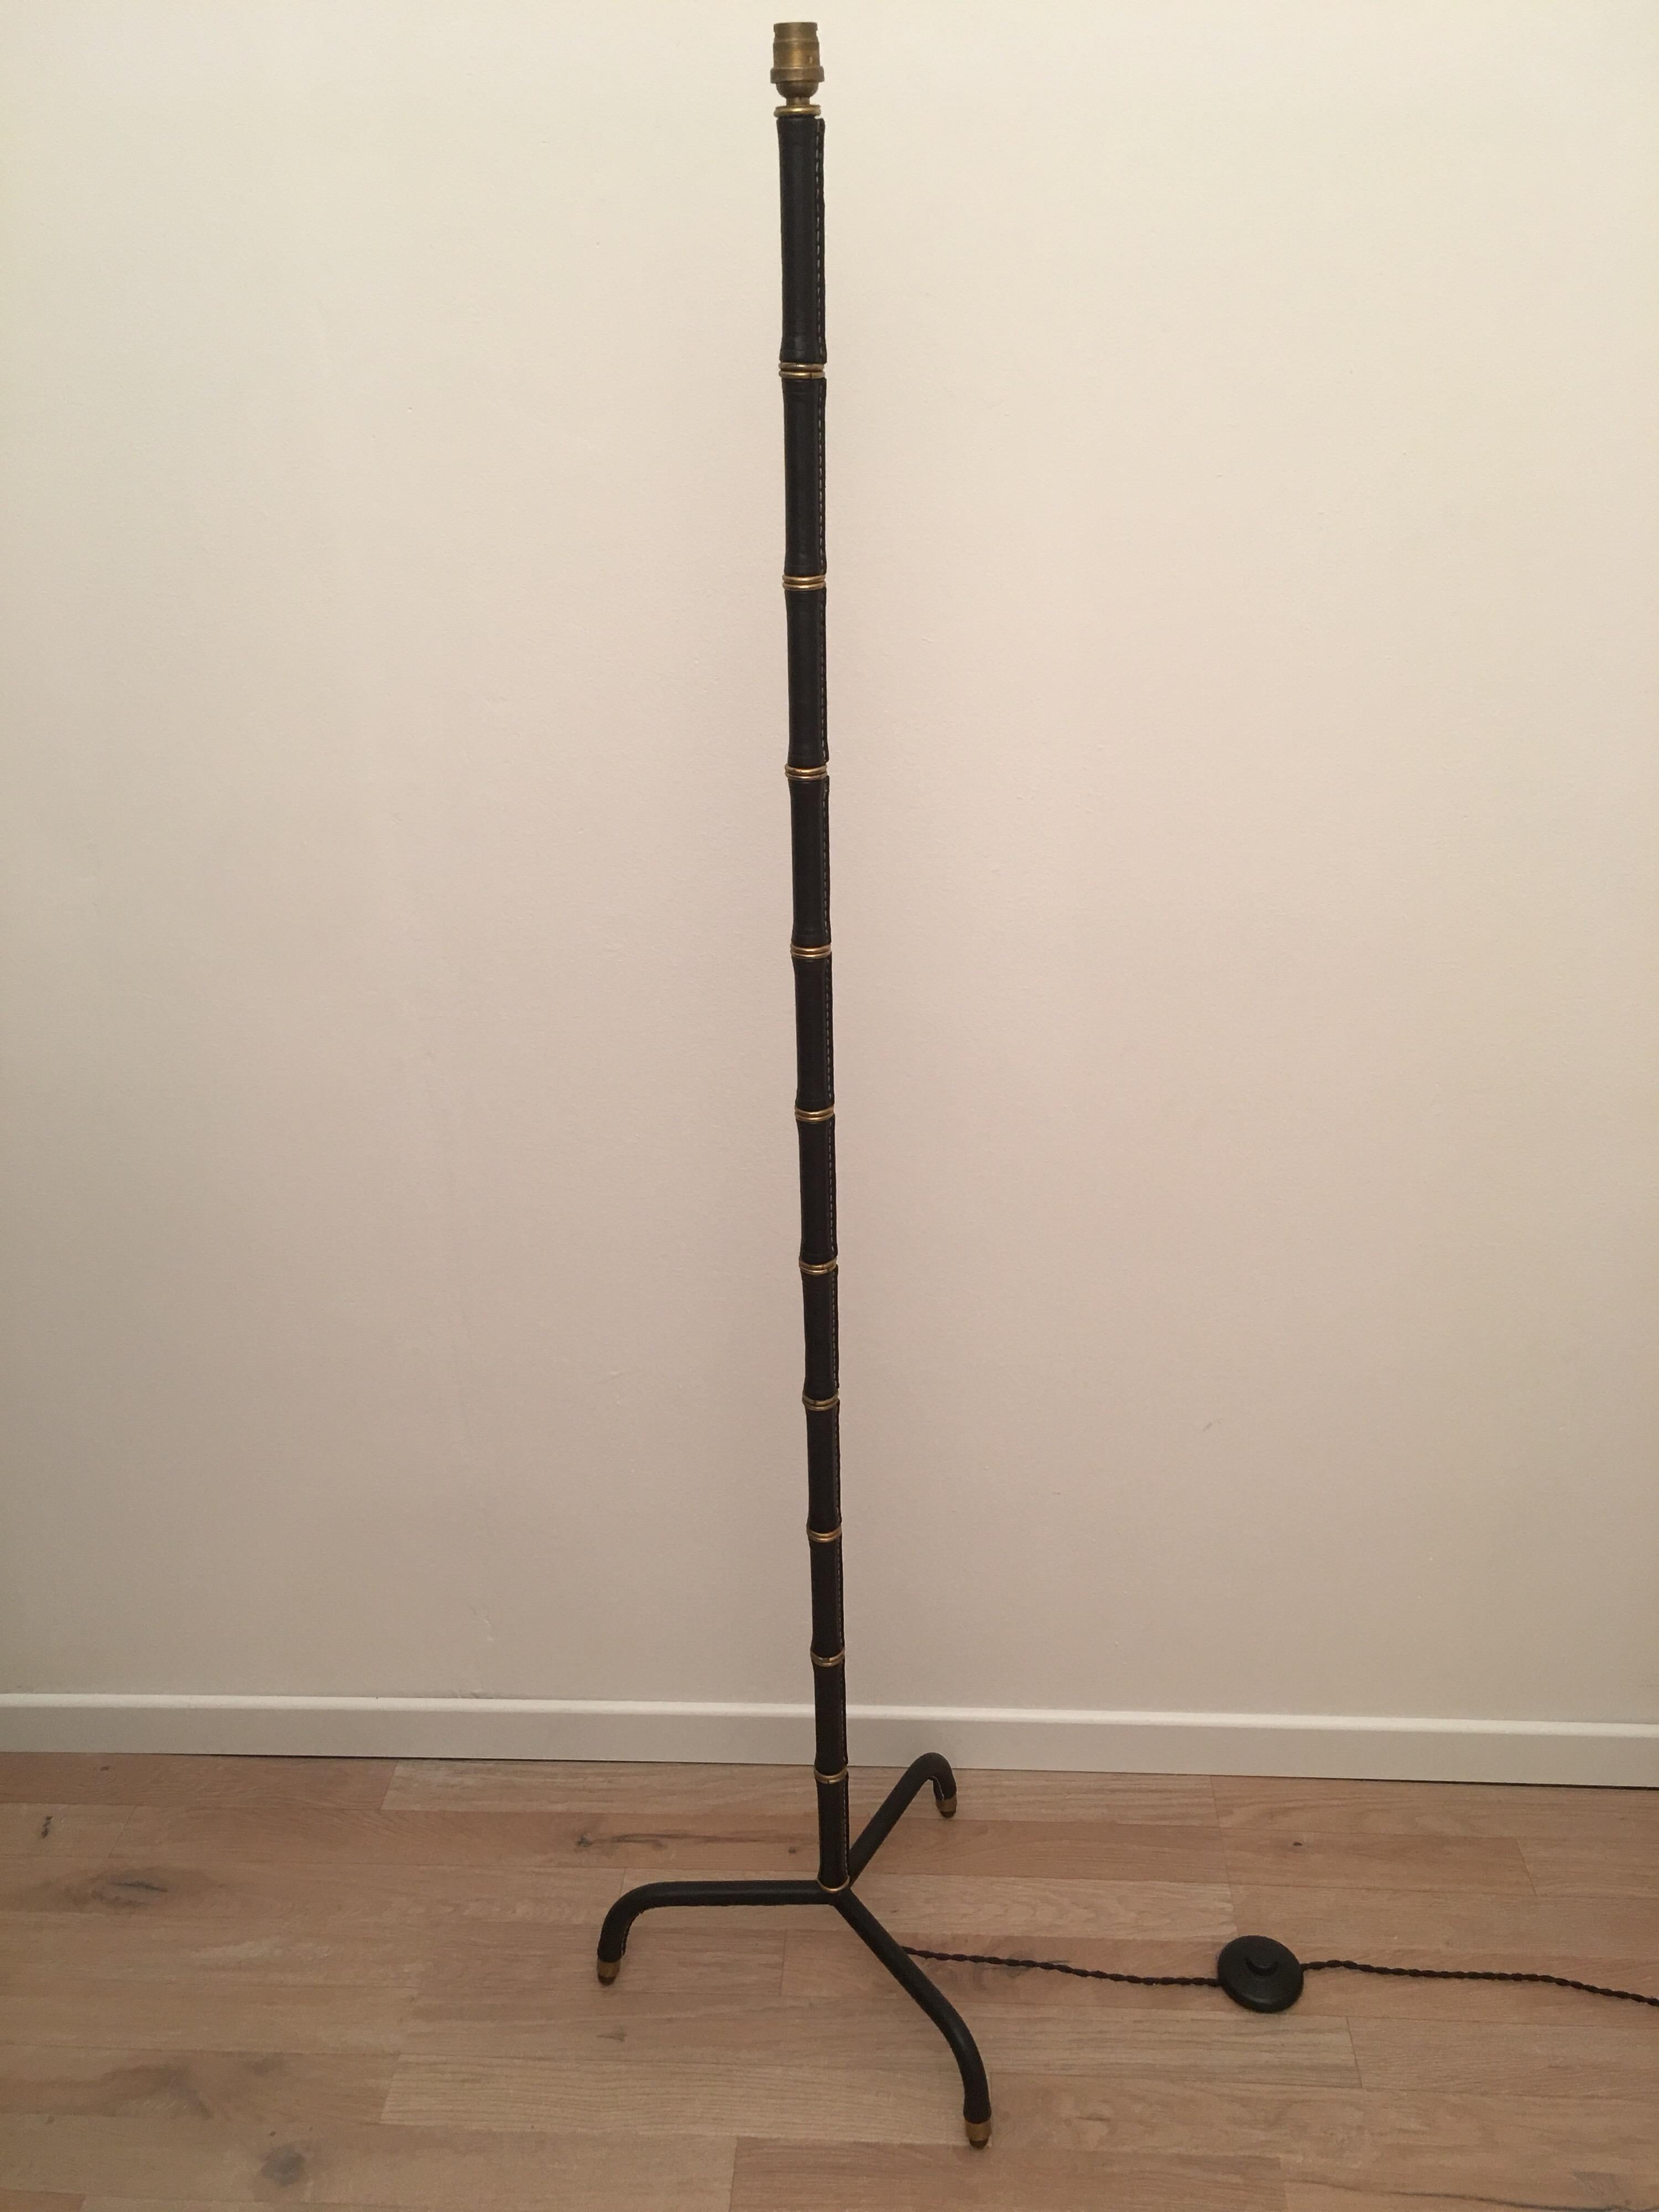 Mid-Century Modern Jacques Adnet Black Stitched Leather Floor Lamp, Bamboo Form, French, 1950s For Sale